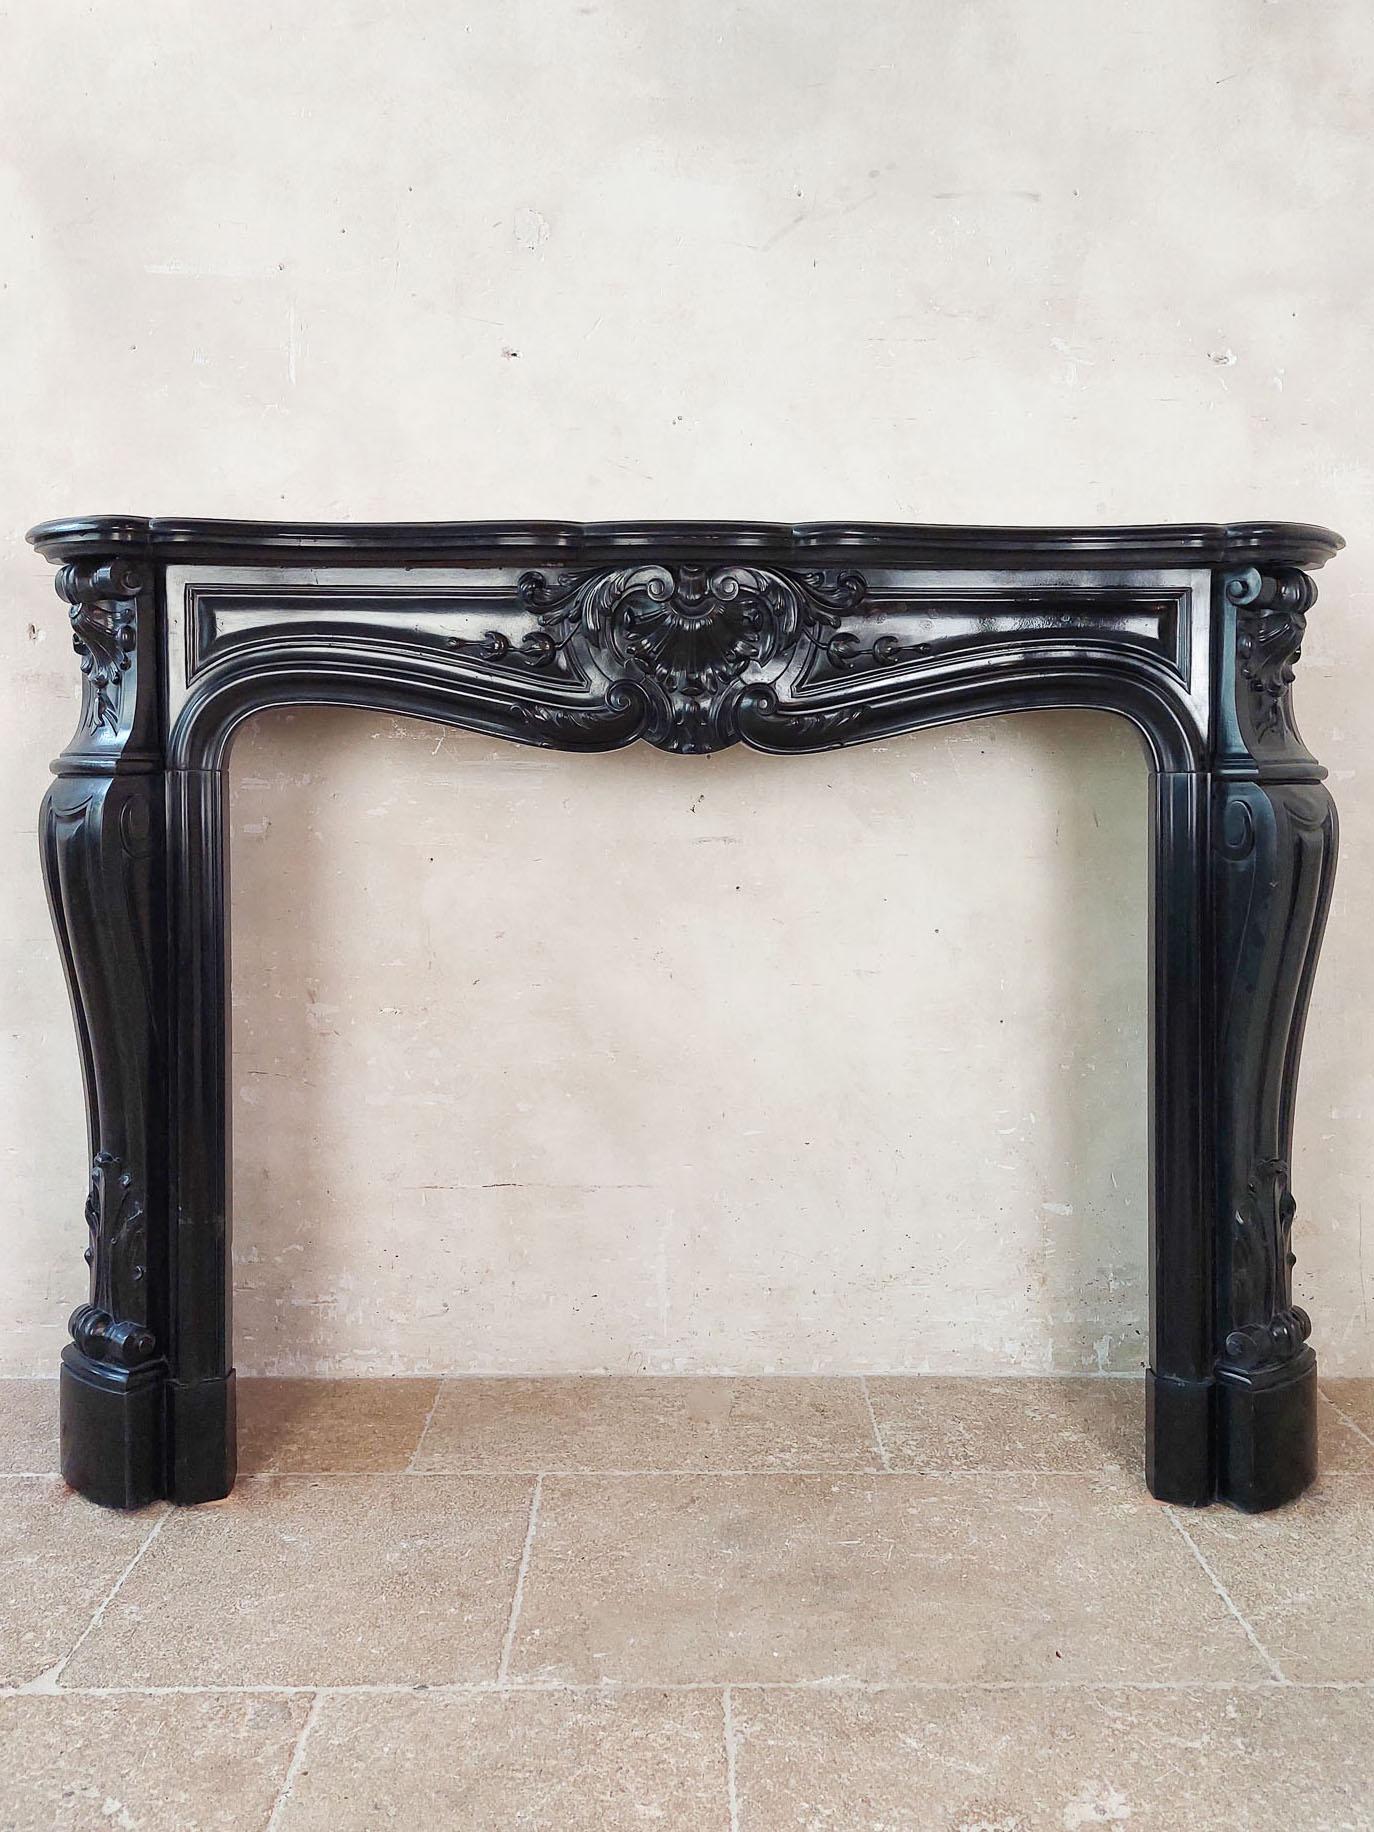 Black marble trois coquilles mantelpiece. Antique French fireplace decorated with three shell ornaments and acanthus leaves on the legs.

This mantelpiece has been restored, see photos

dimensions: h 110 x w 151 x d 42 cm